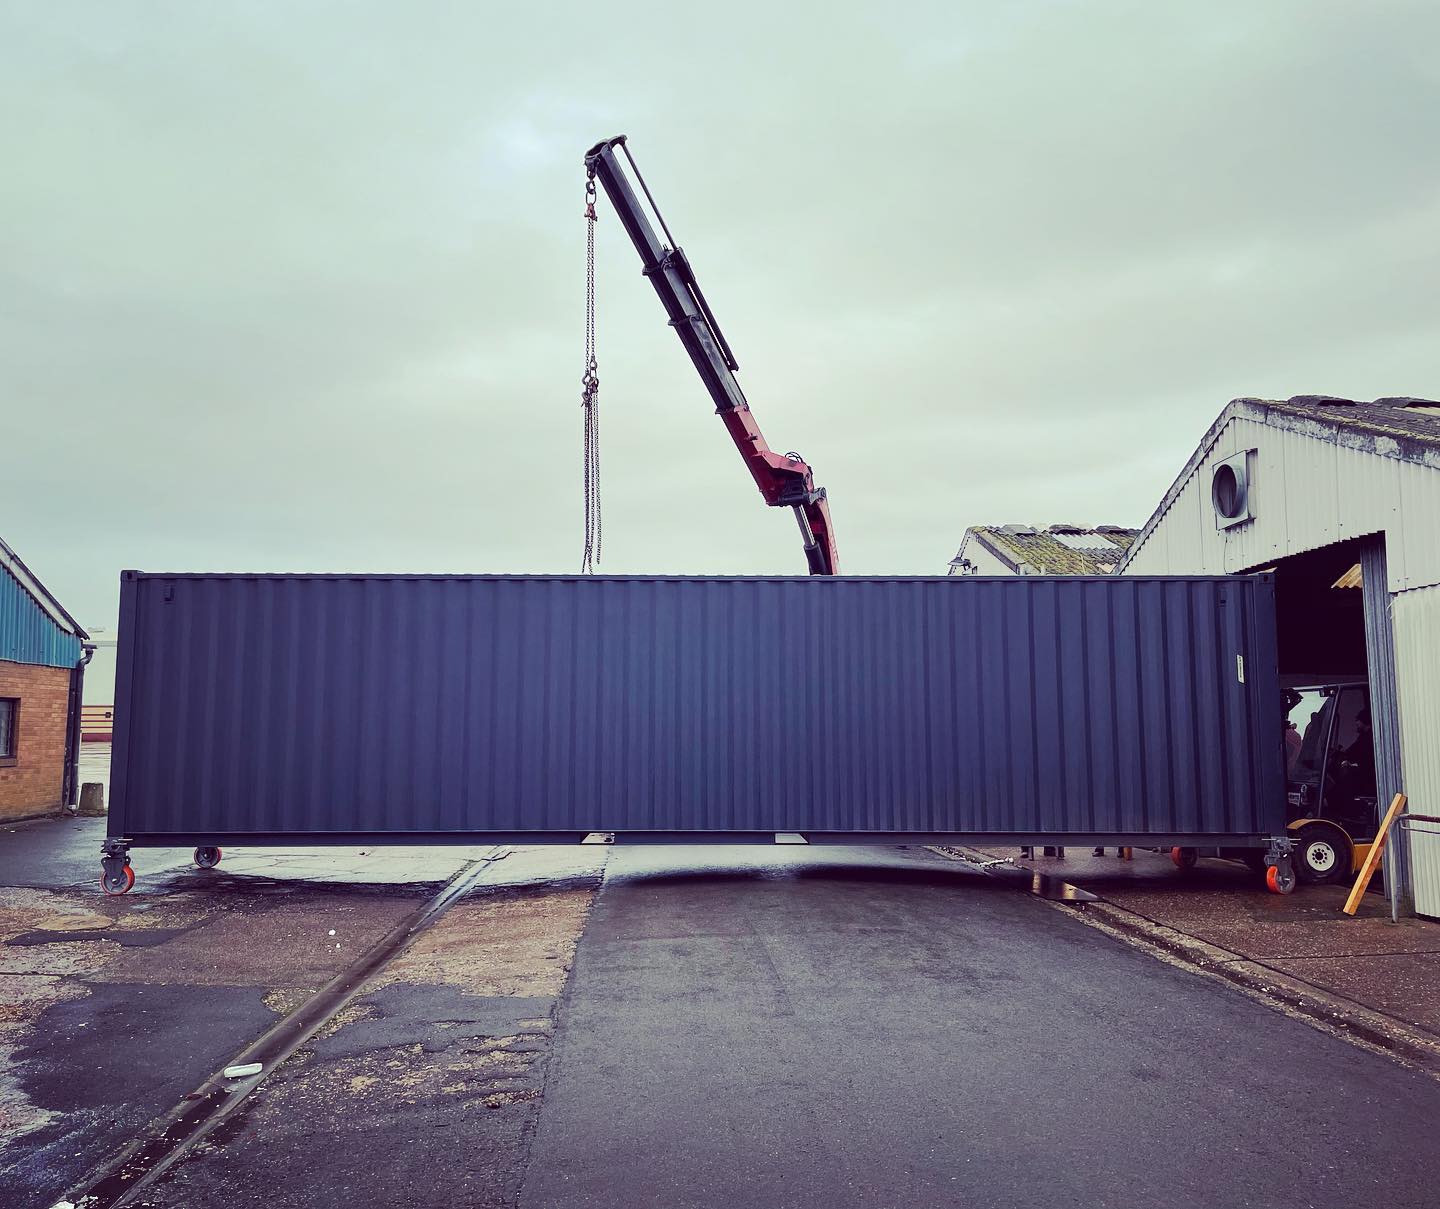 Up cycling two tons of steel shipping container into a 7-bed sleeping pod is all in a days work for Doodle Build.